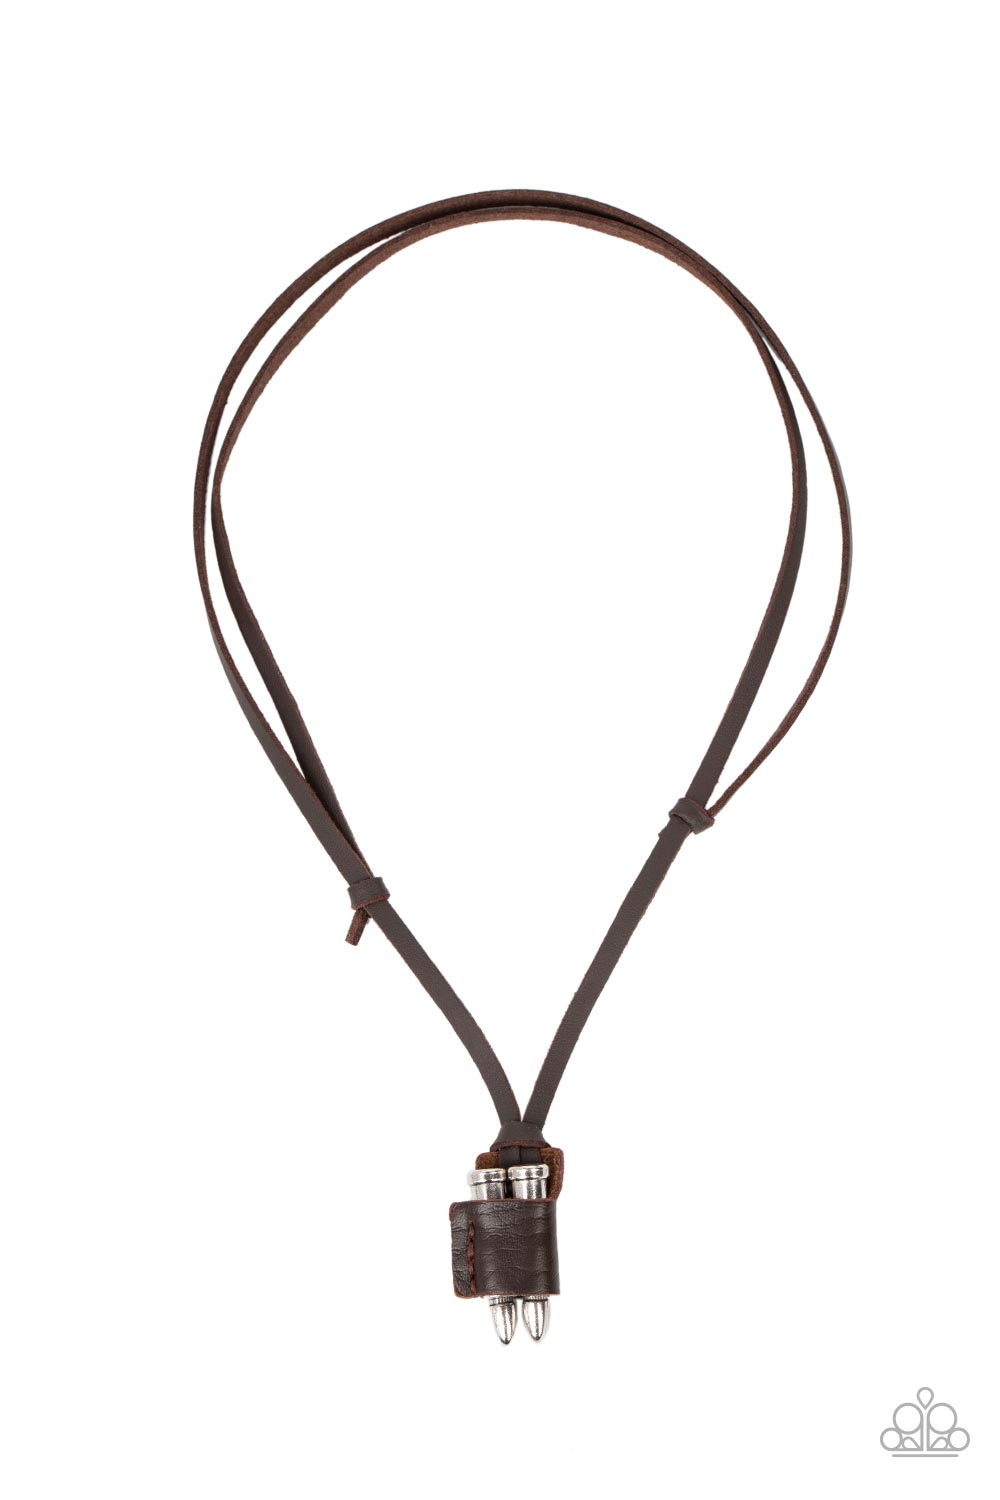 On the Lookout Brown Unisex Necklace - Paparazzi Accessories  A piece of brown leather wraps around a pair of silver bullets, creating an edgy urban pendant at the bottom of knotted strands of brown leather. Features an adjustable sliding knot closure.  Sold as one individual necklace.